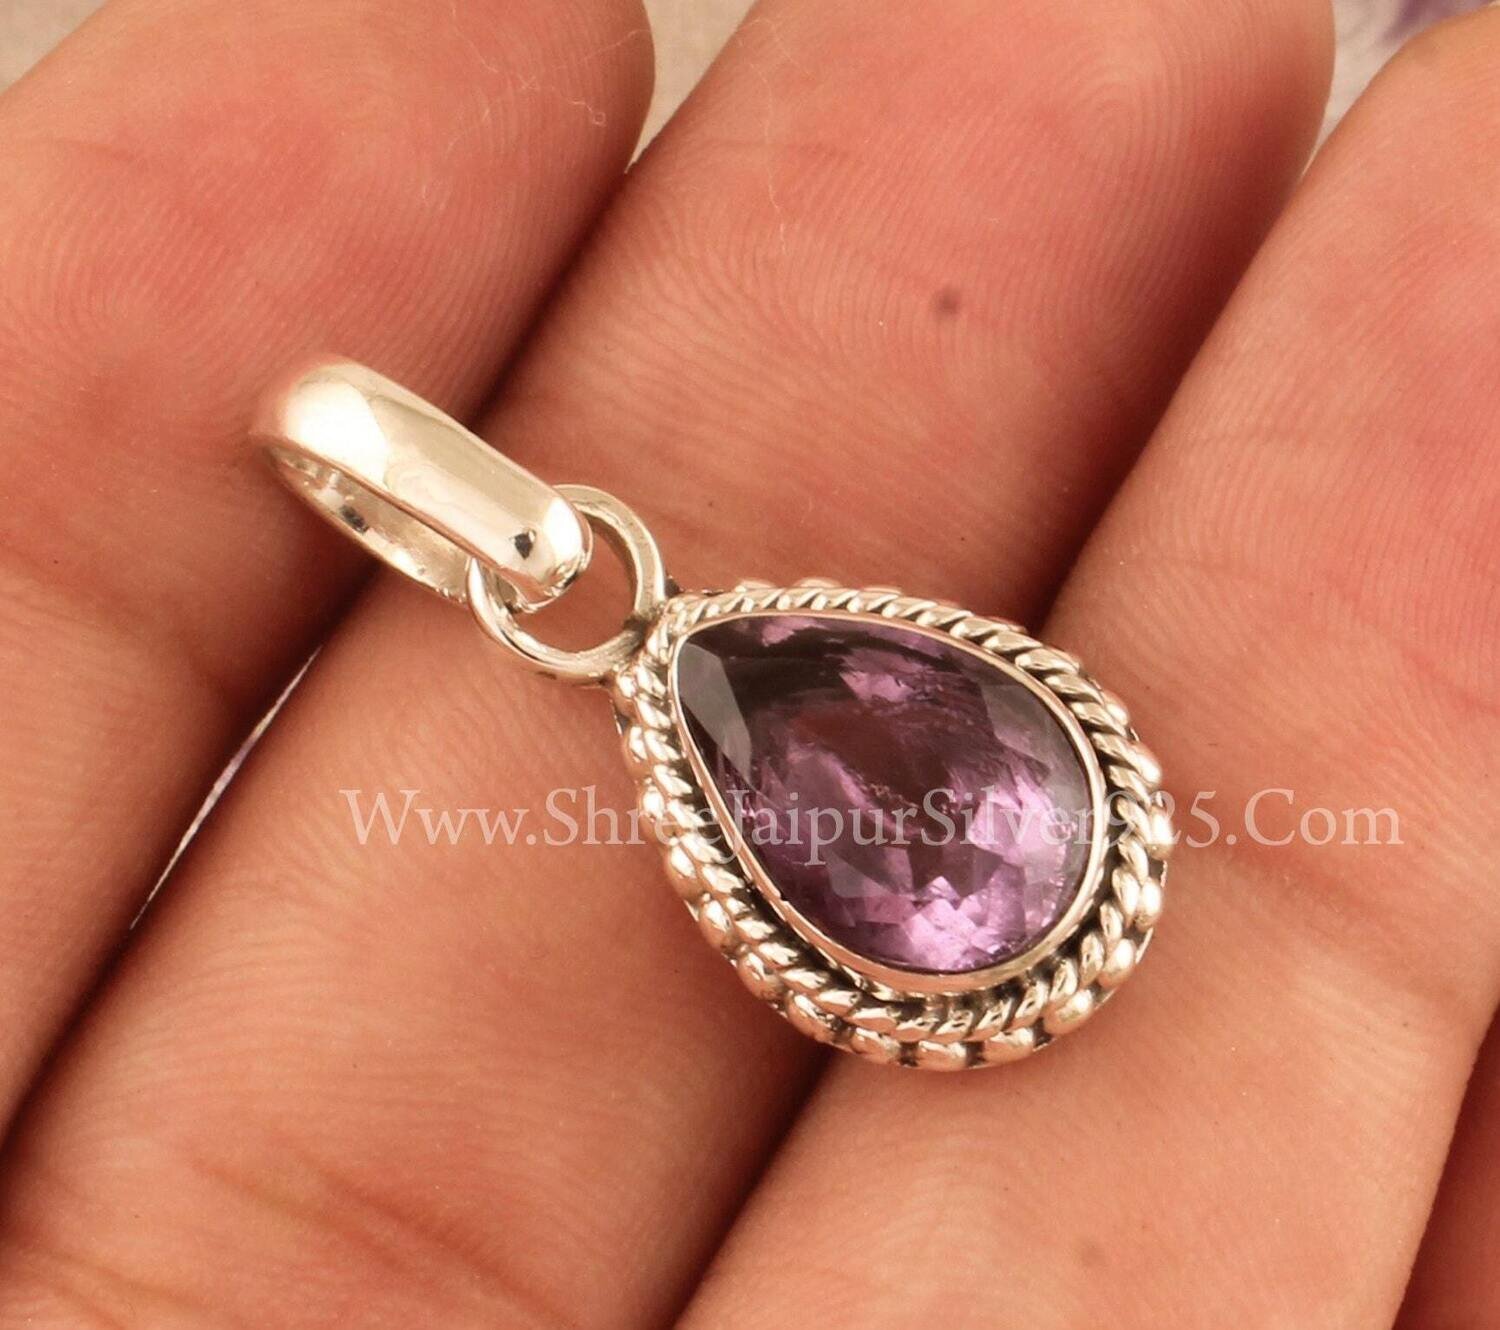 Natural Purple Amethyst Solid 925 Sterling Silver Necklace Pendant For Women, Handmade Engraved Pear Silver Pendant For Wedding Anniversary